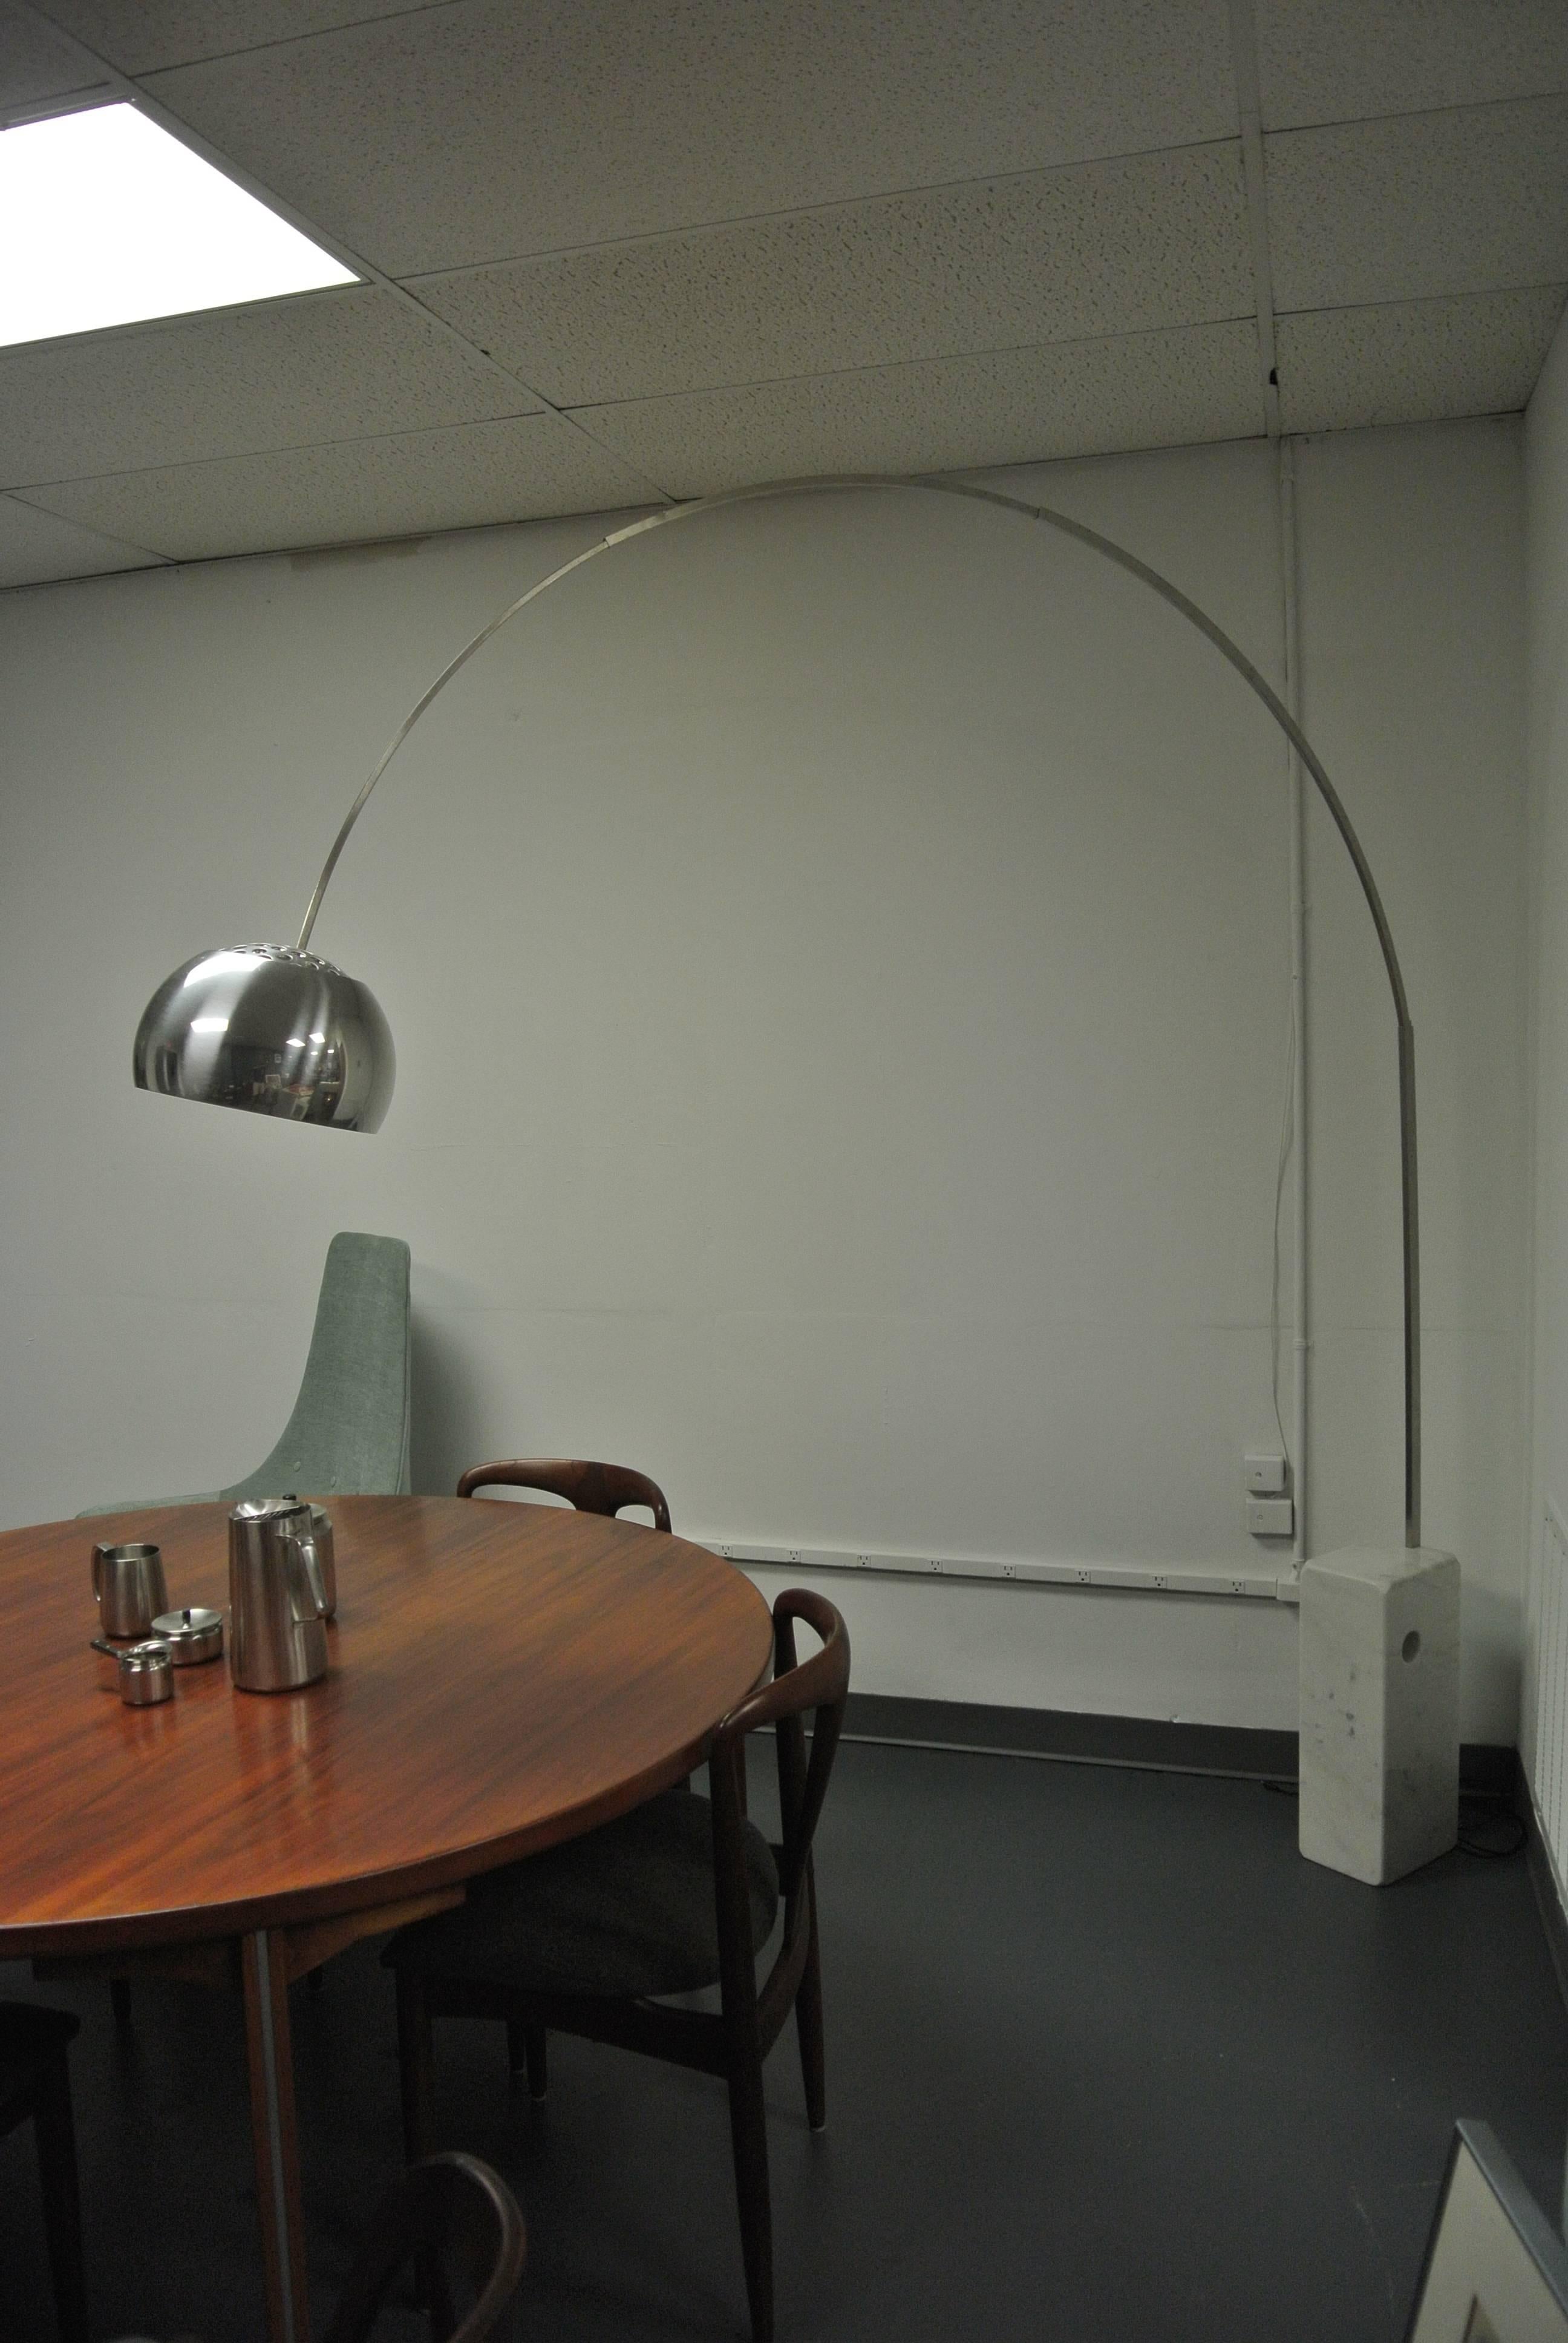 Achille Castiglioni designed Arco floor lamp by Flos. Features LED flat panel bulb with floor dimmer.